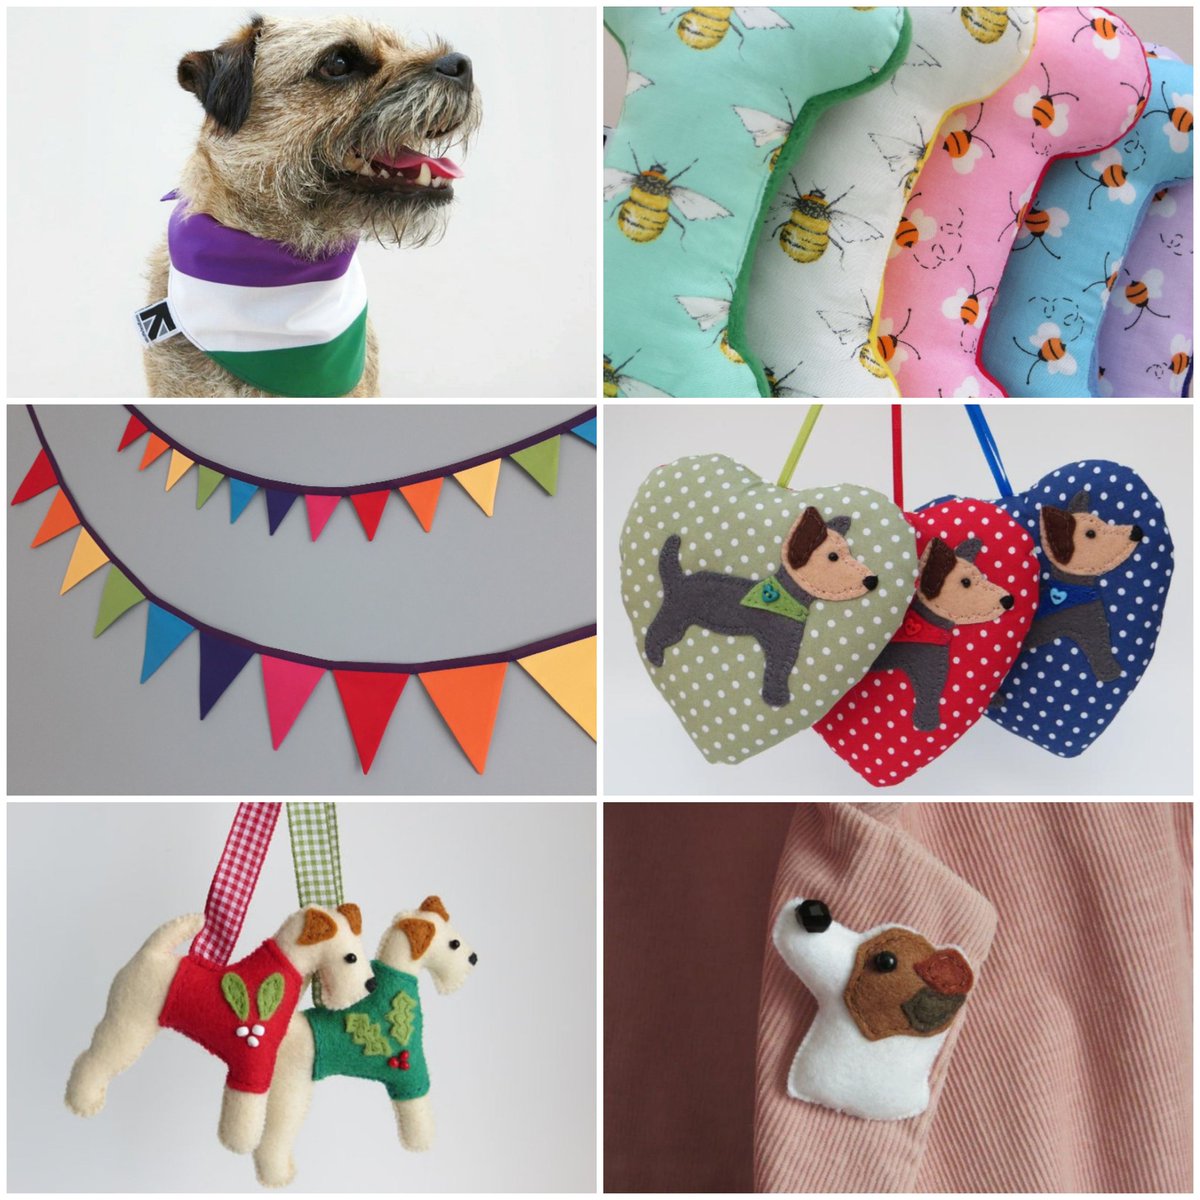 Had a bad day? Don't 'terrier' self-up about it - visit @misheleneous on @etsy to find #handmade products for you, your home & your pooch! Go on... treat yourself - you're woof it! Shop now: etsy.com/uk/shop/MisHel… #thepetsbiz #dogs #gifts